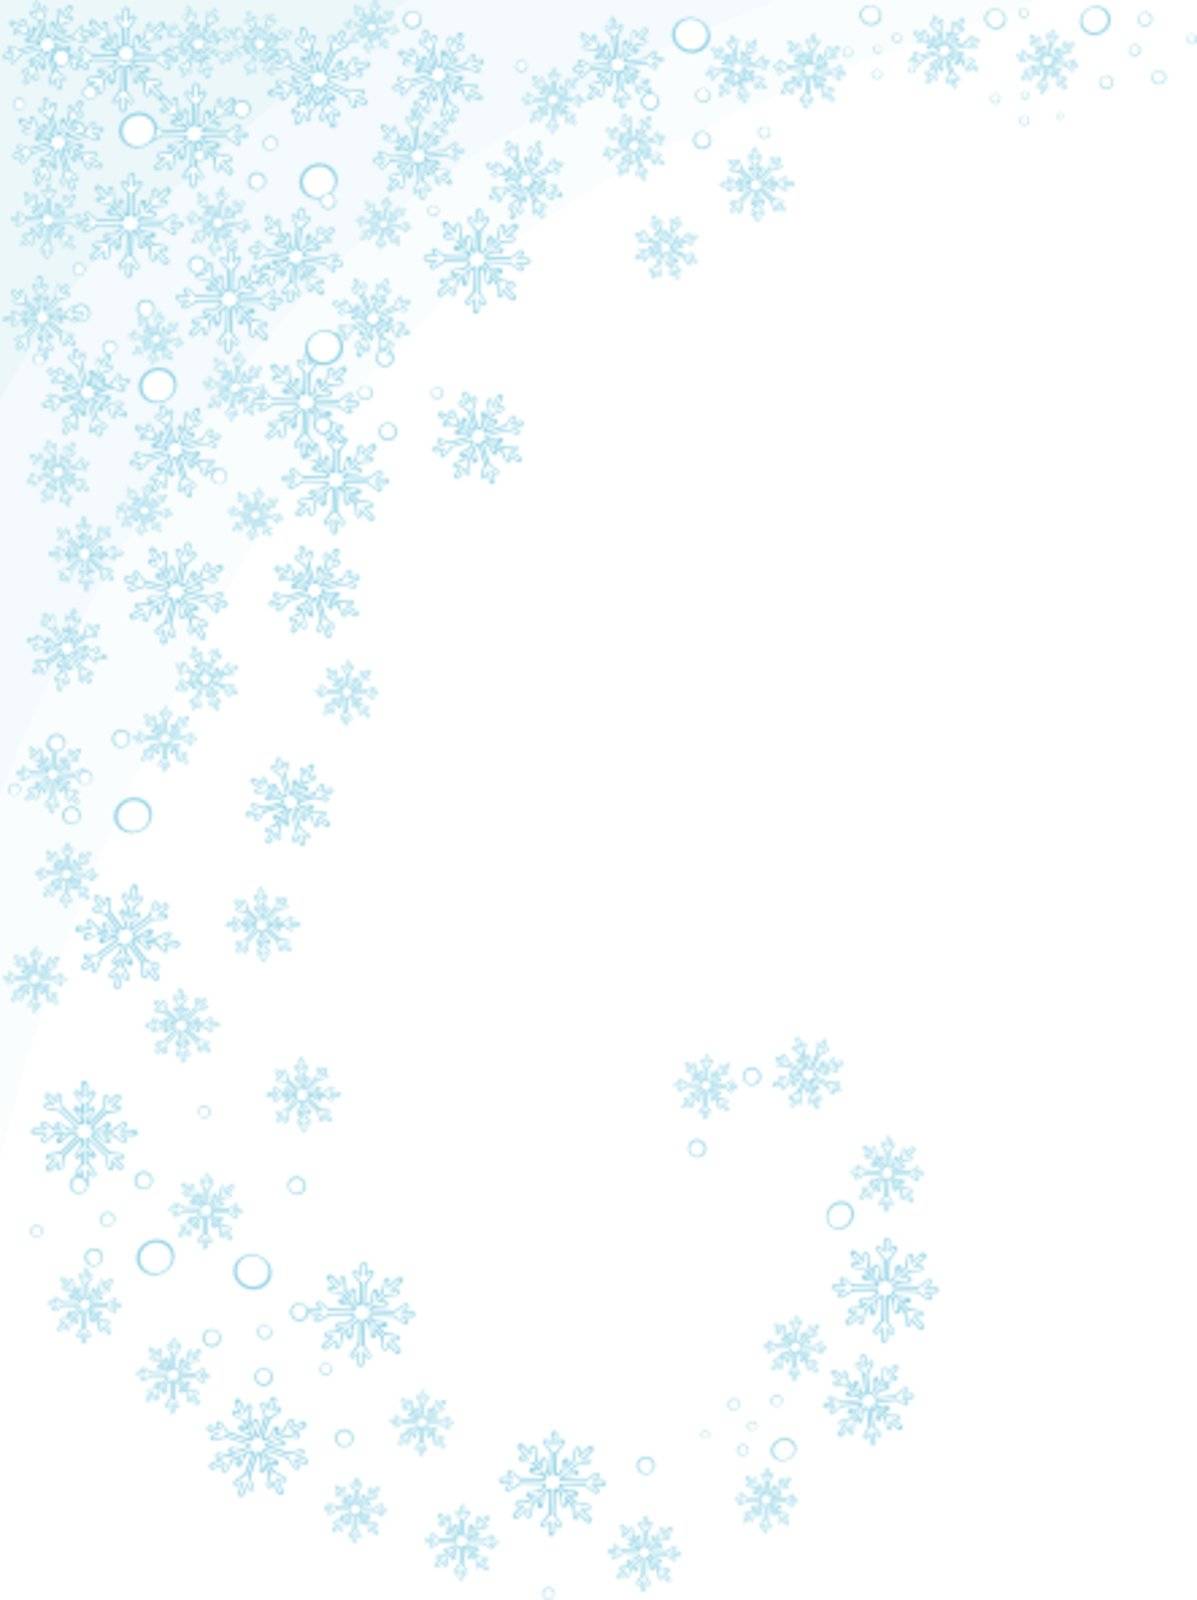 Background from blue snowflakes